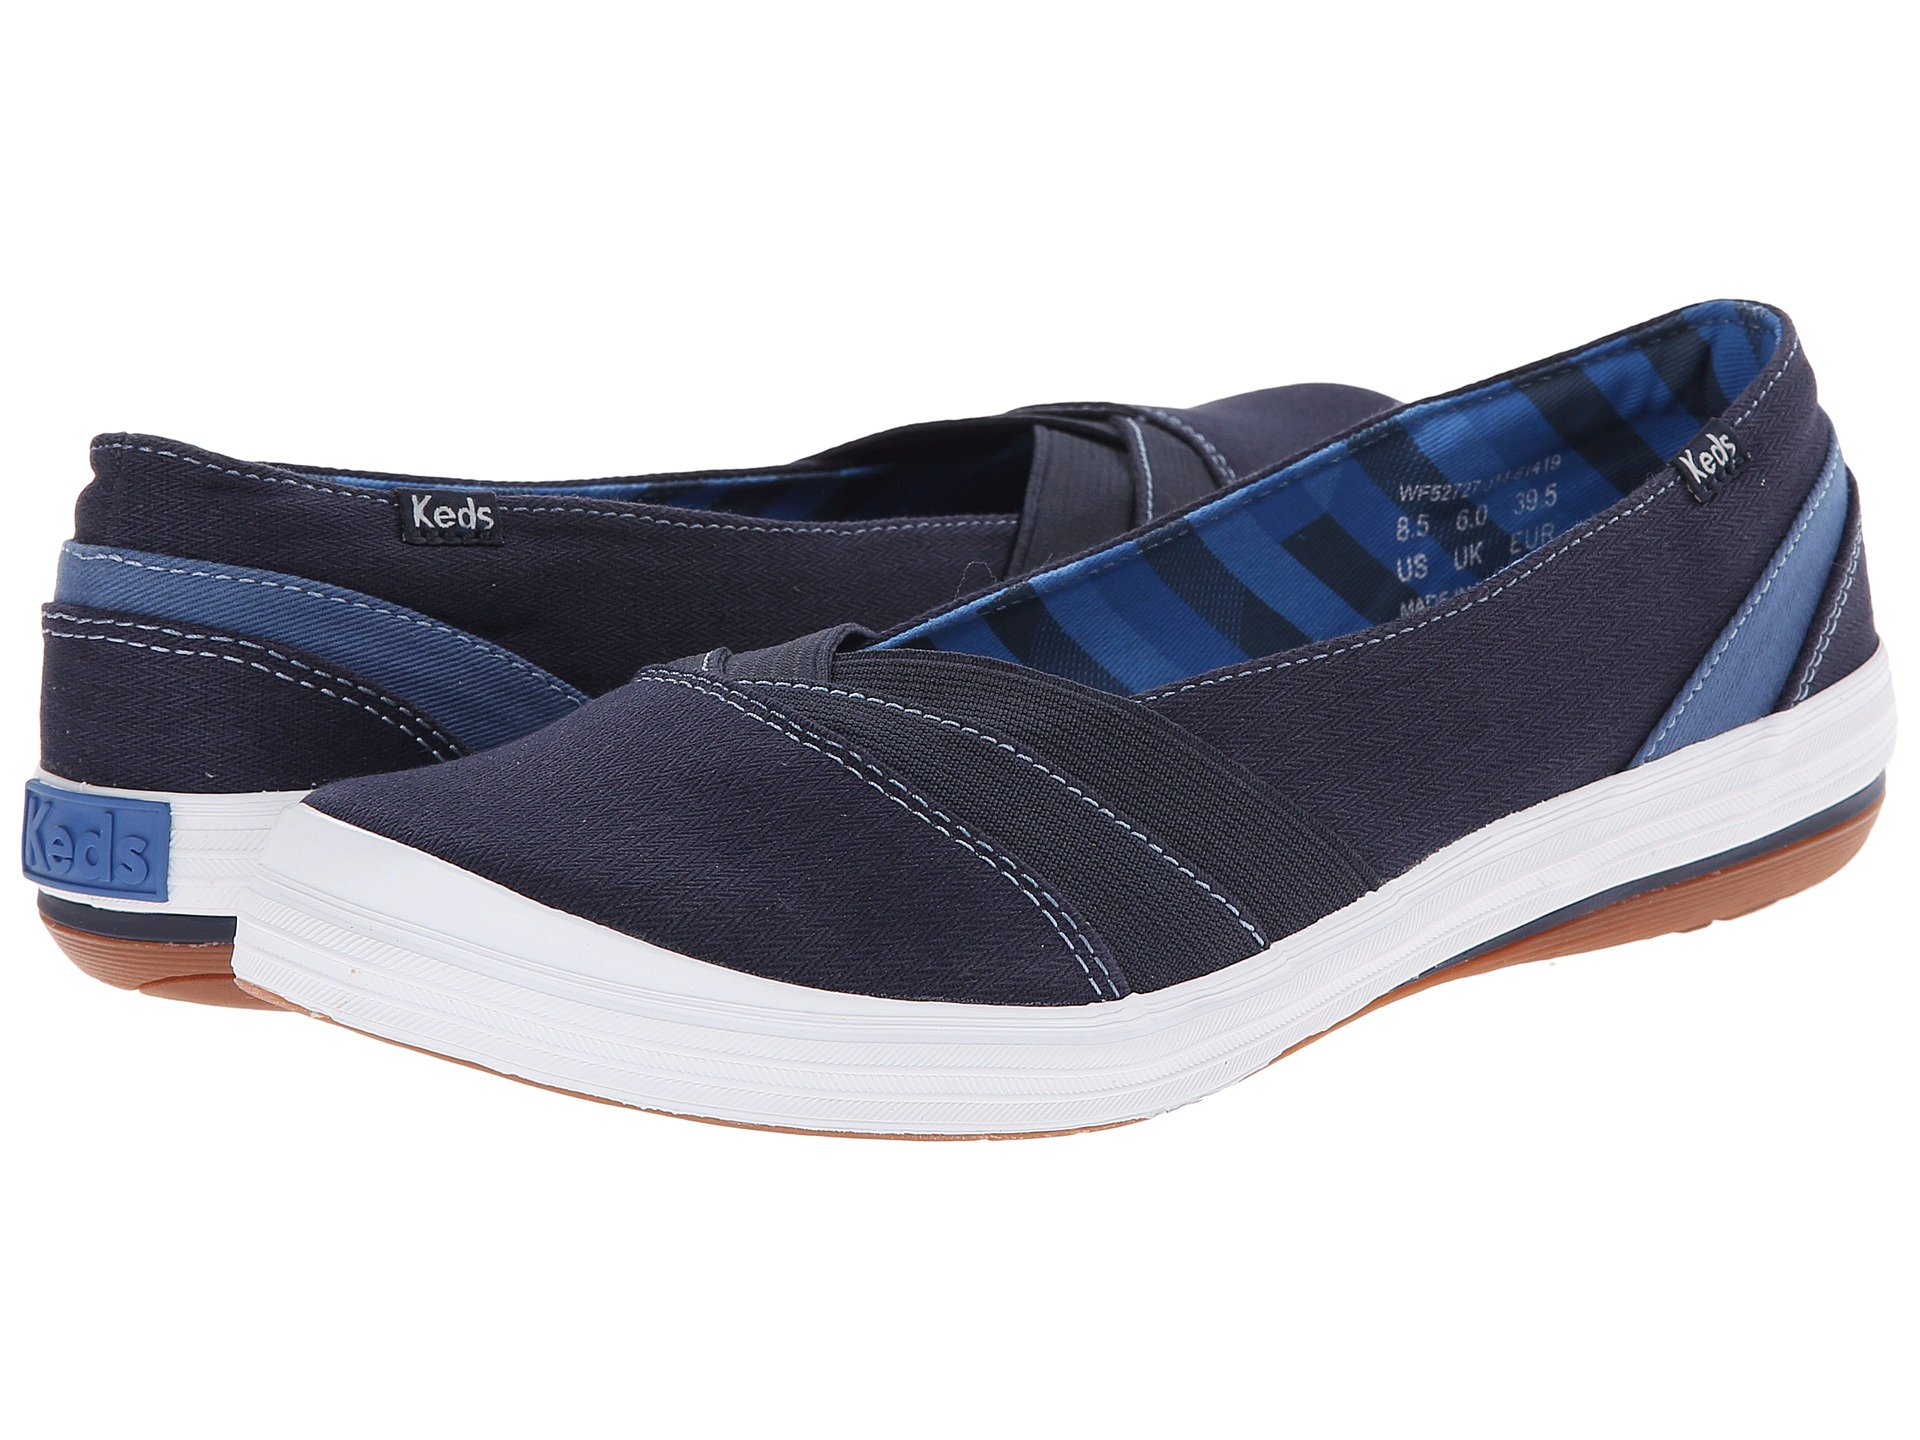 Lyst - Keds Whimsy Slip-on Canvas/gore in Blue